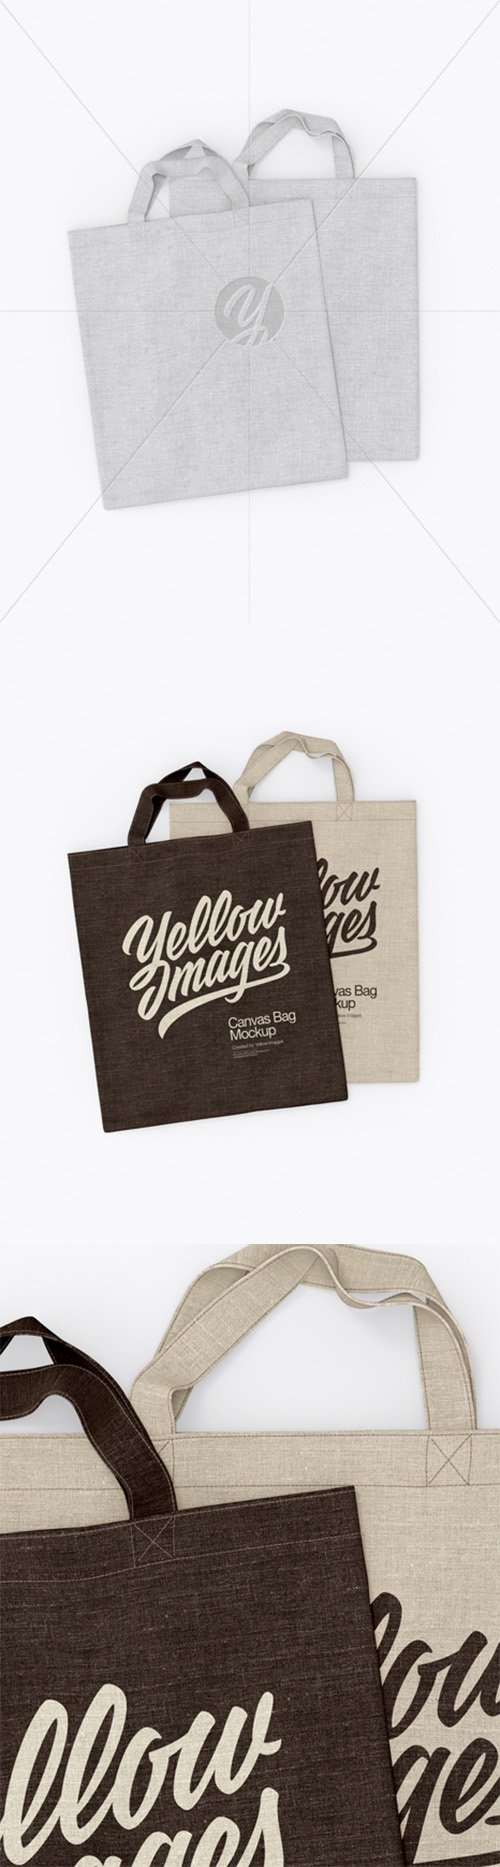 Two Canvas Bags Mockup - Top View 24888 TIF